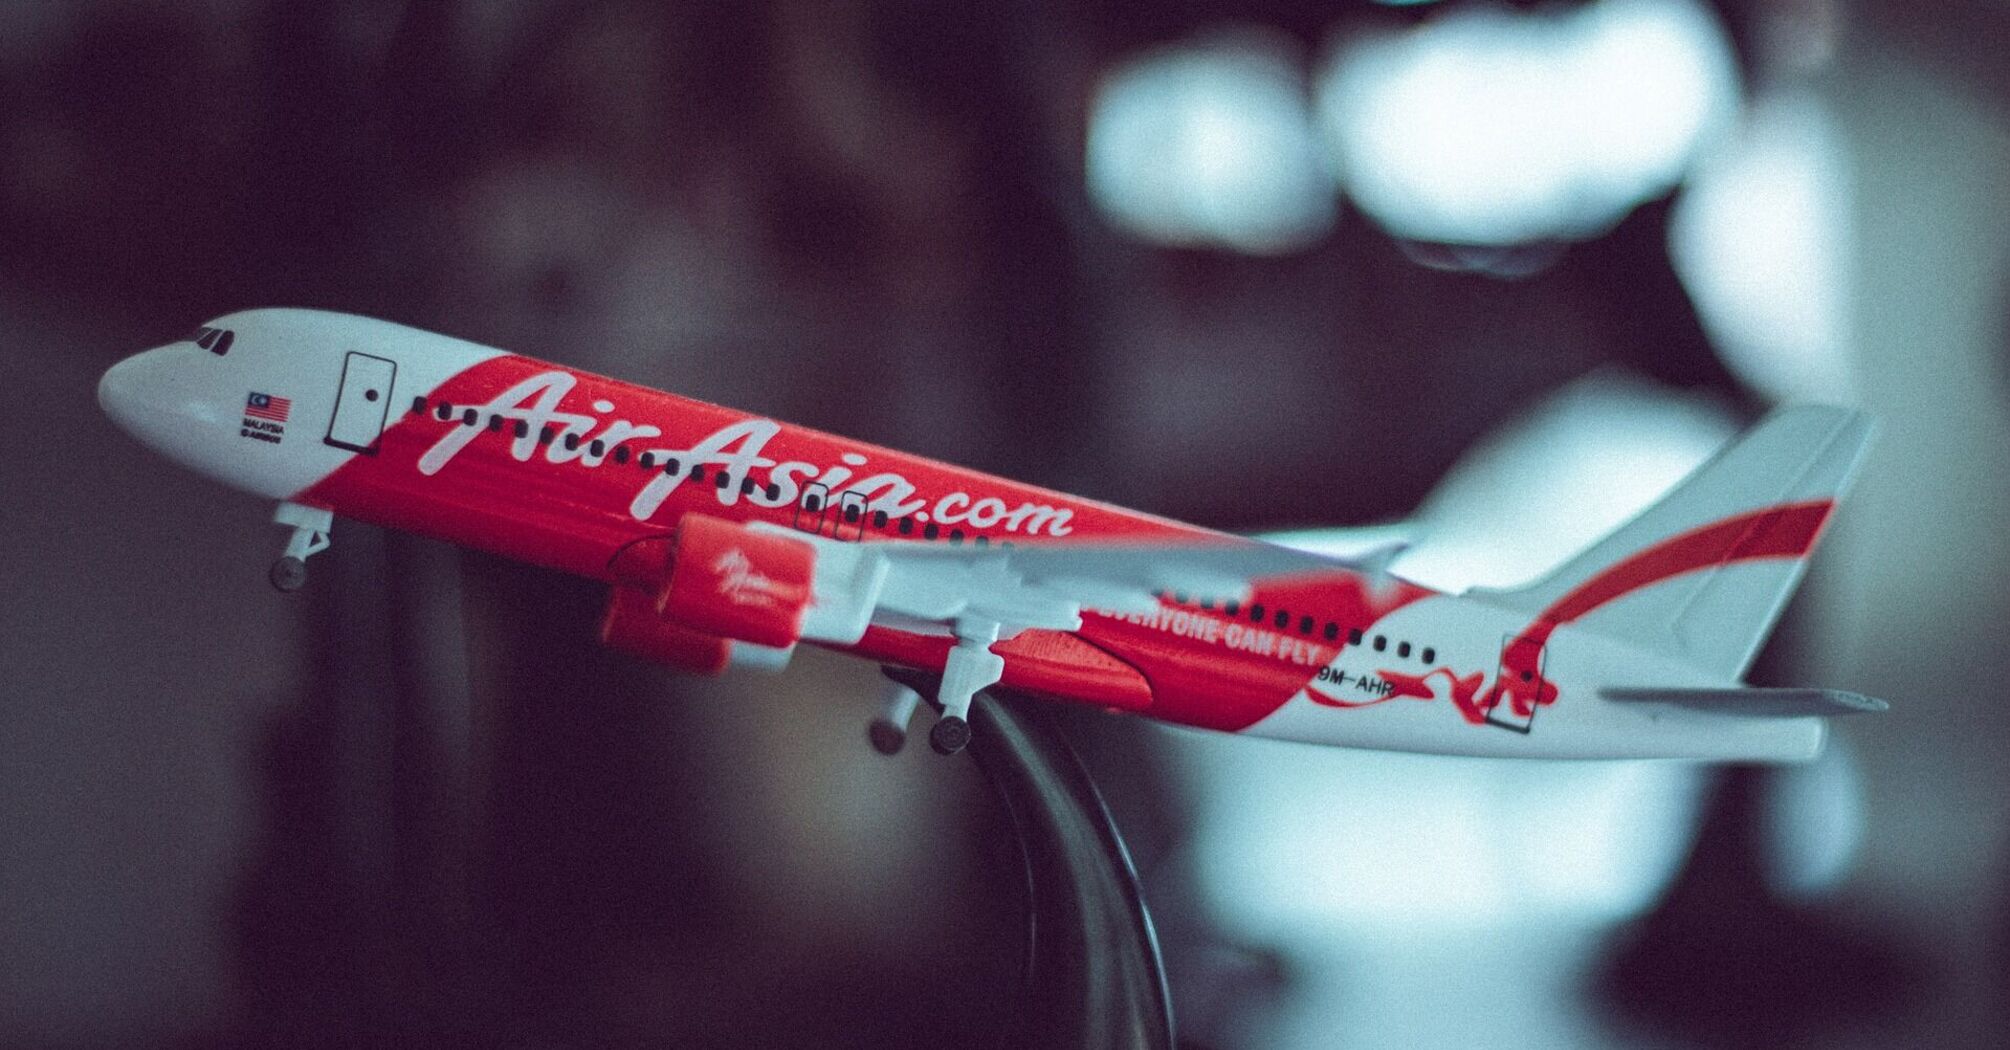 Model of an AirAsia airplane on a stand with 'AirAsia.com' and 'Now everyone can fly' written on the side 